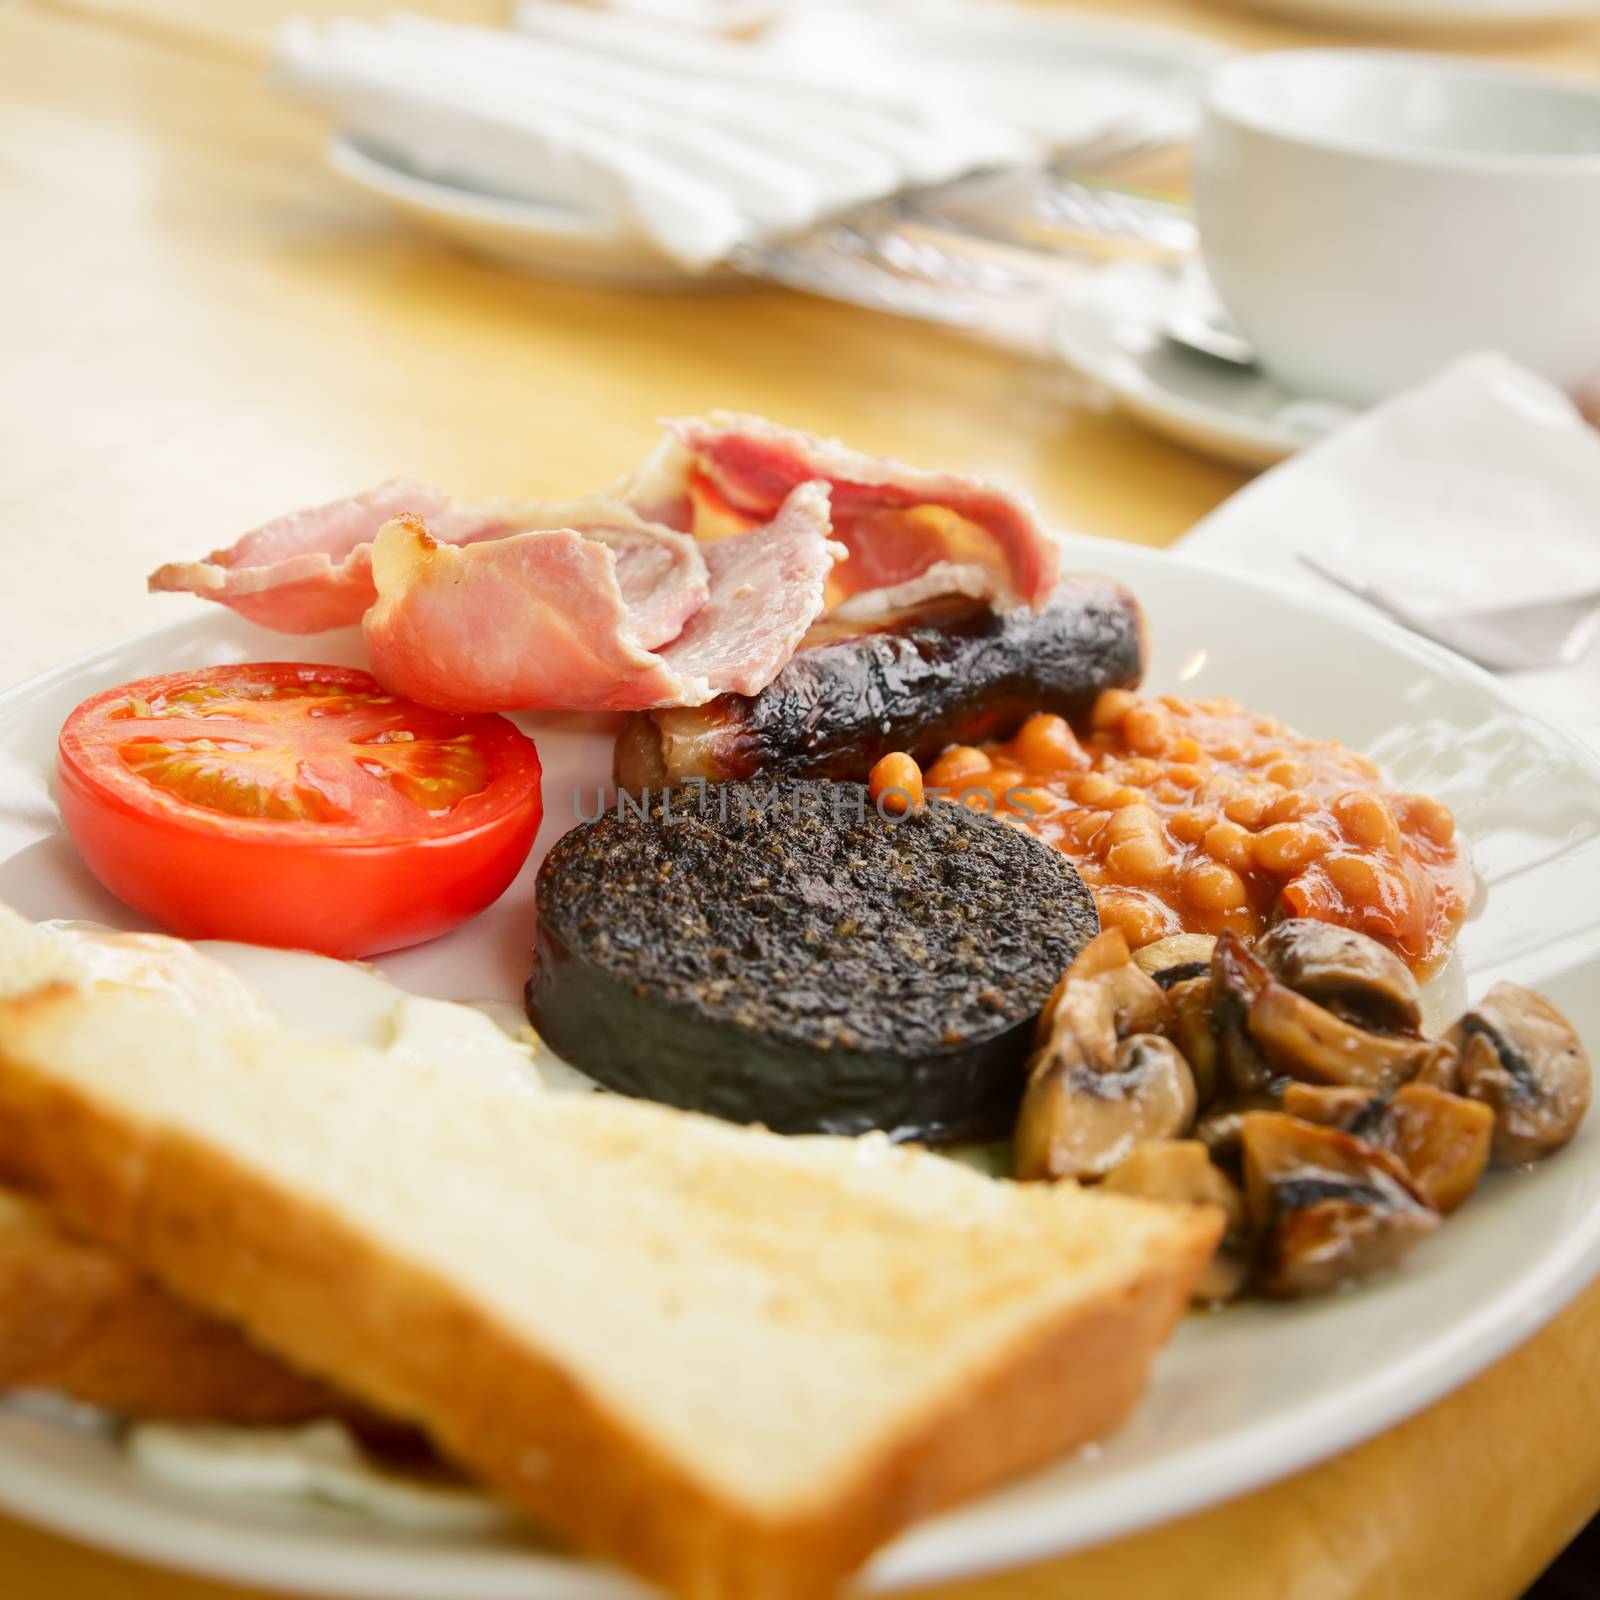 Plate with Full Scottish breakfast containing toasts, fried eggs, baked beans, grilled black pudding, sausage, tomato, mushrooms and bacon